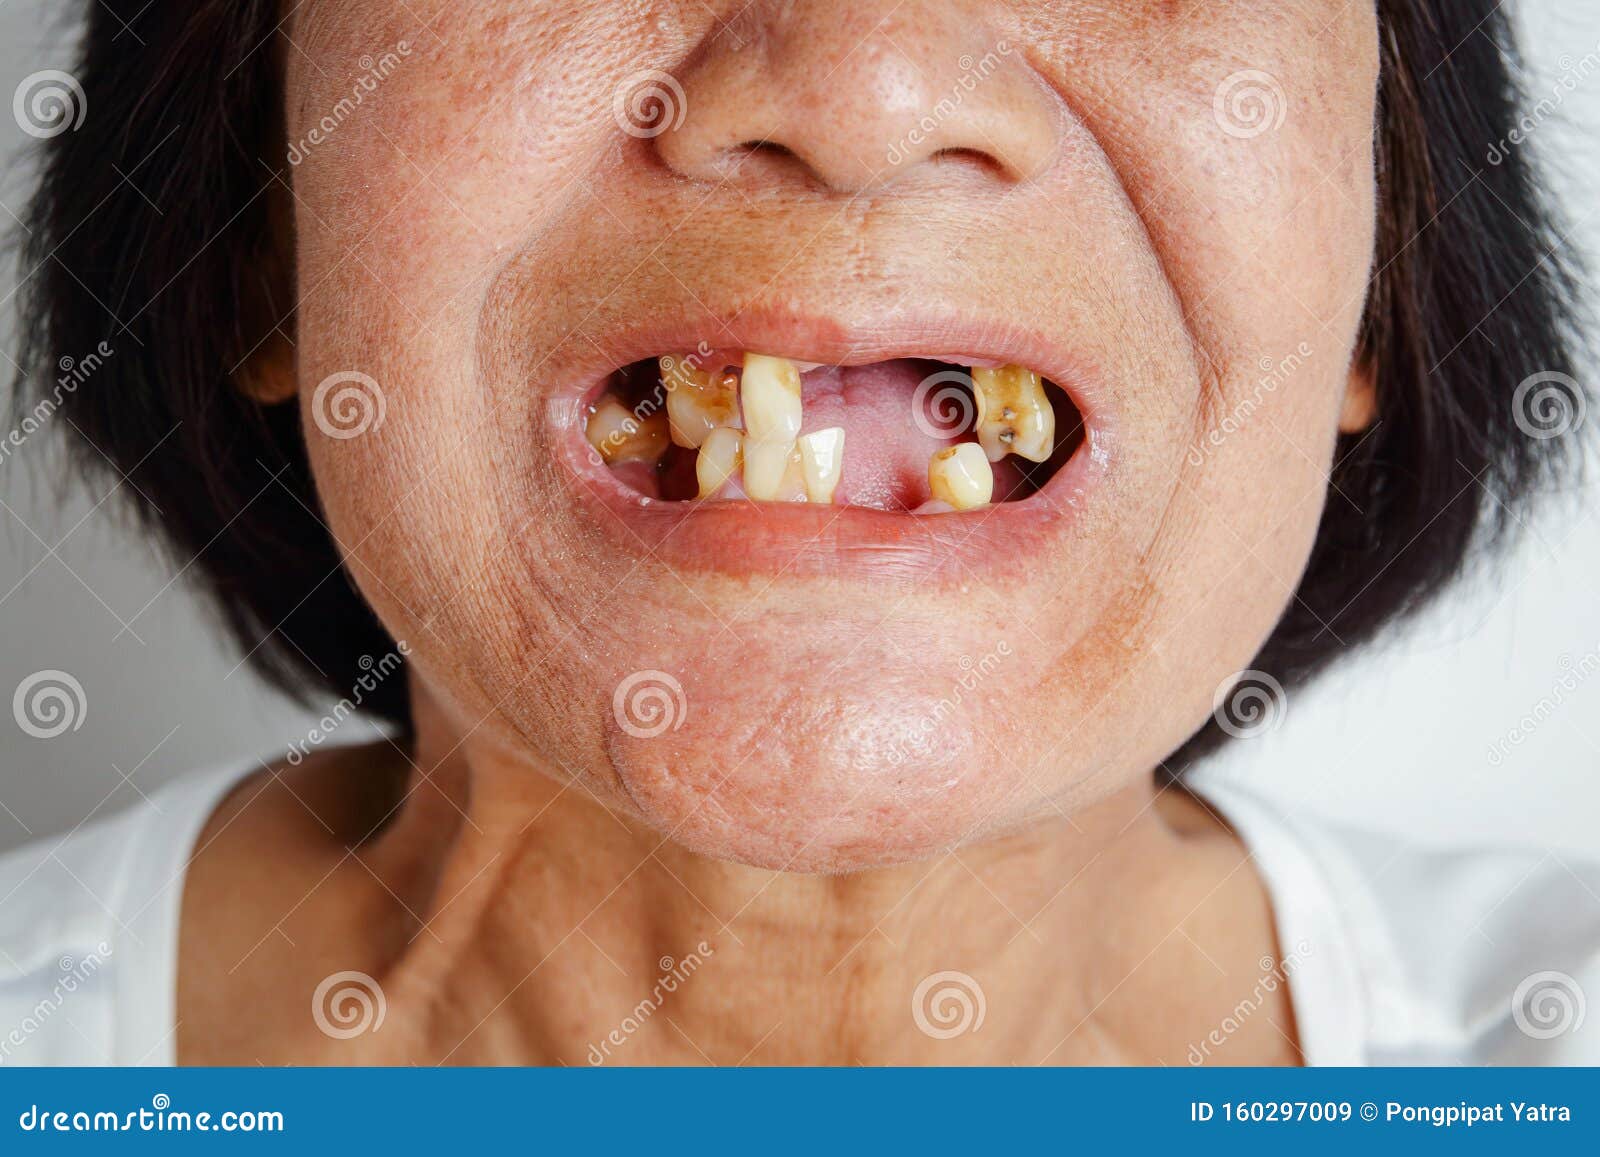 Woman with rotten teeth